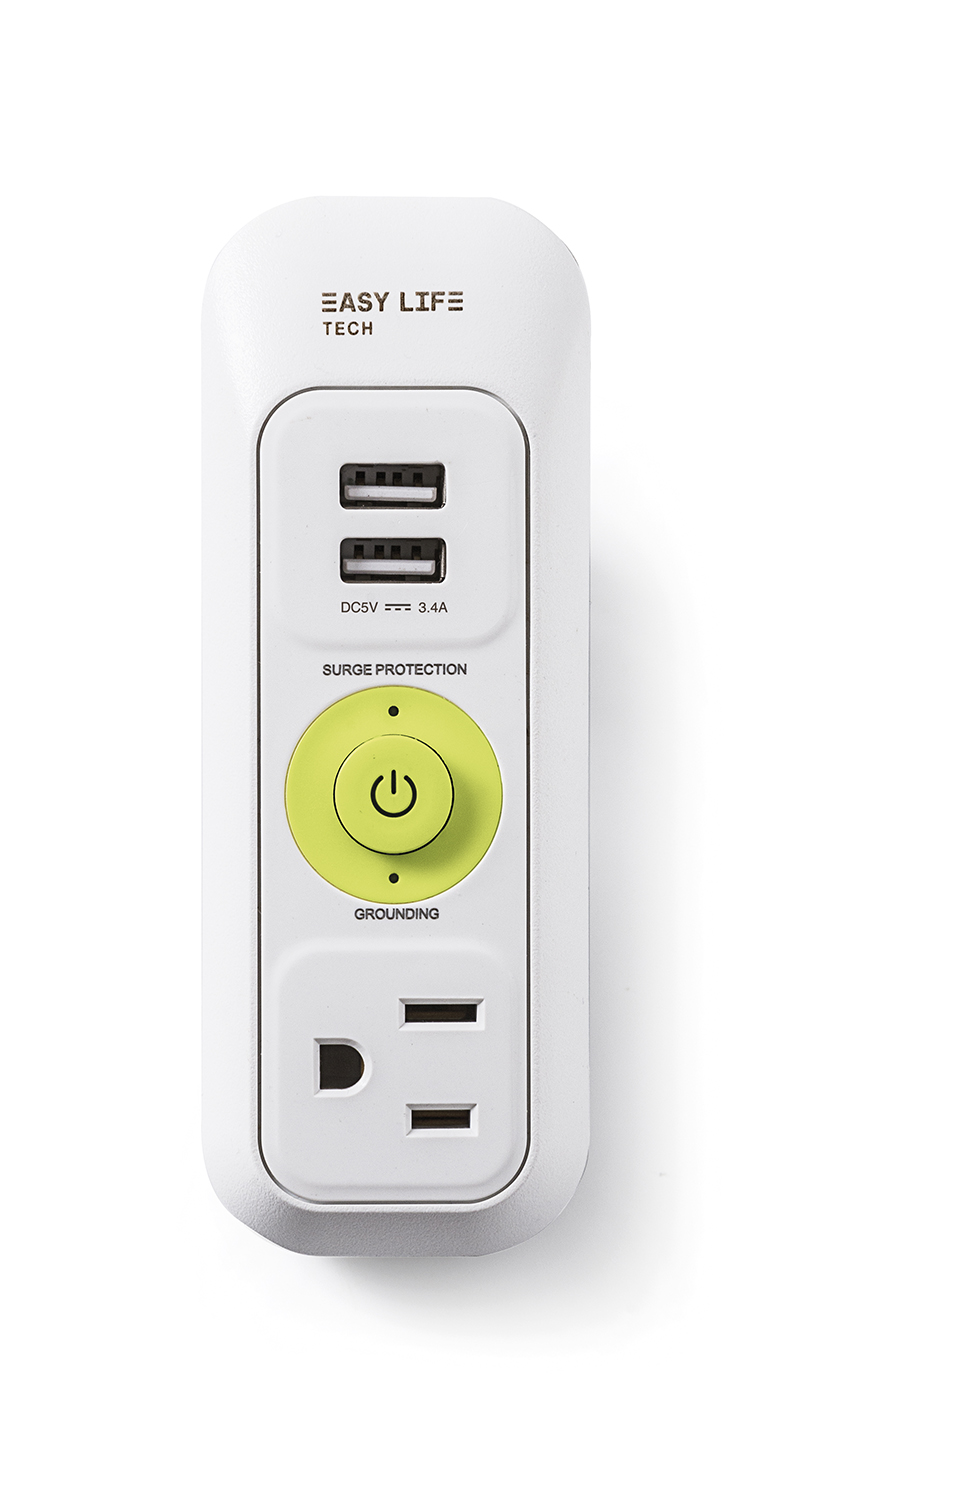 Easylife Tech Wall Power Strip Plug 1 AC Outlet with 2 USB